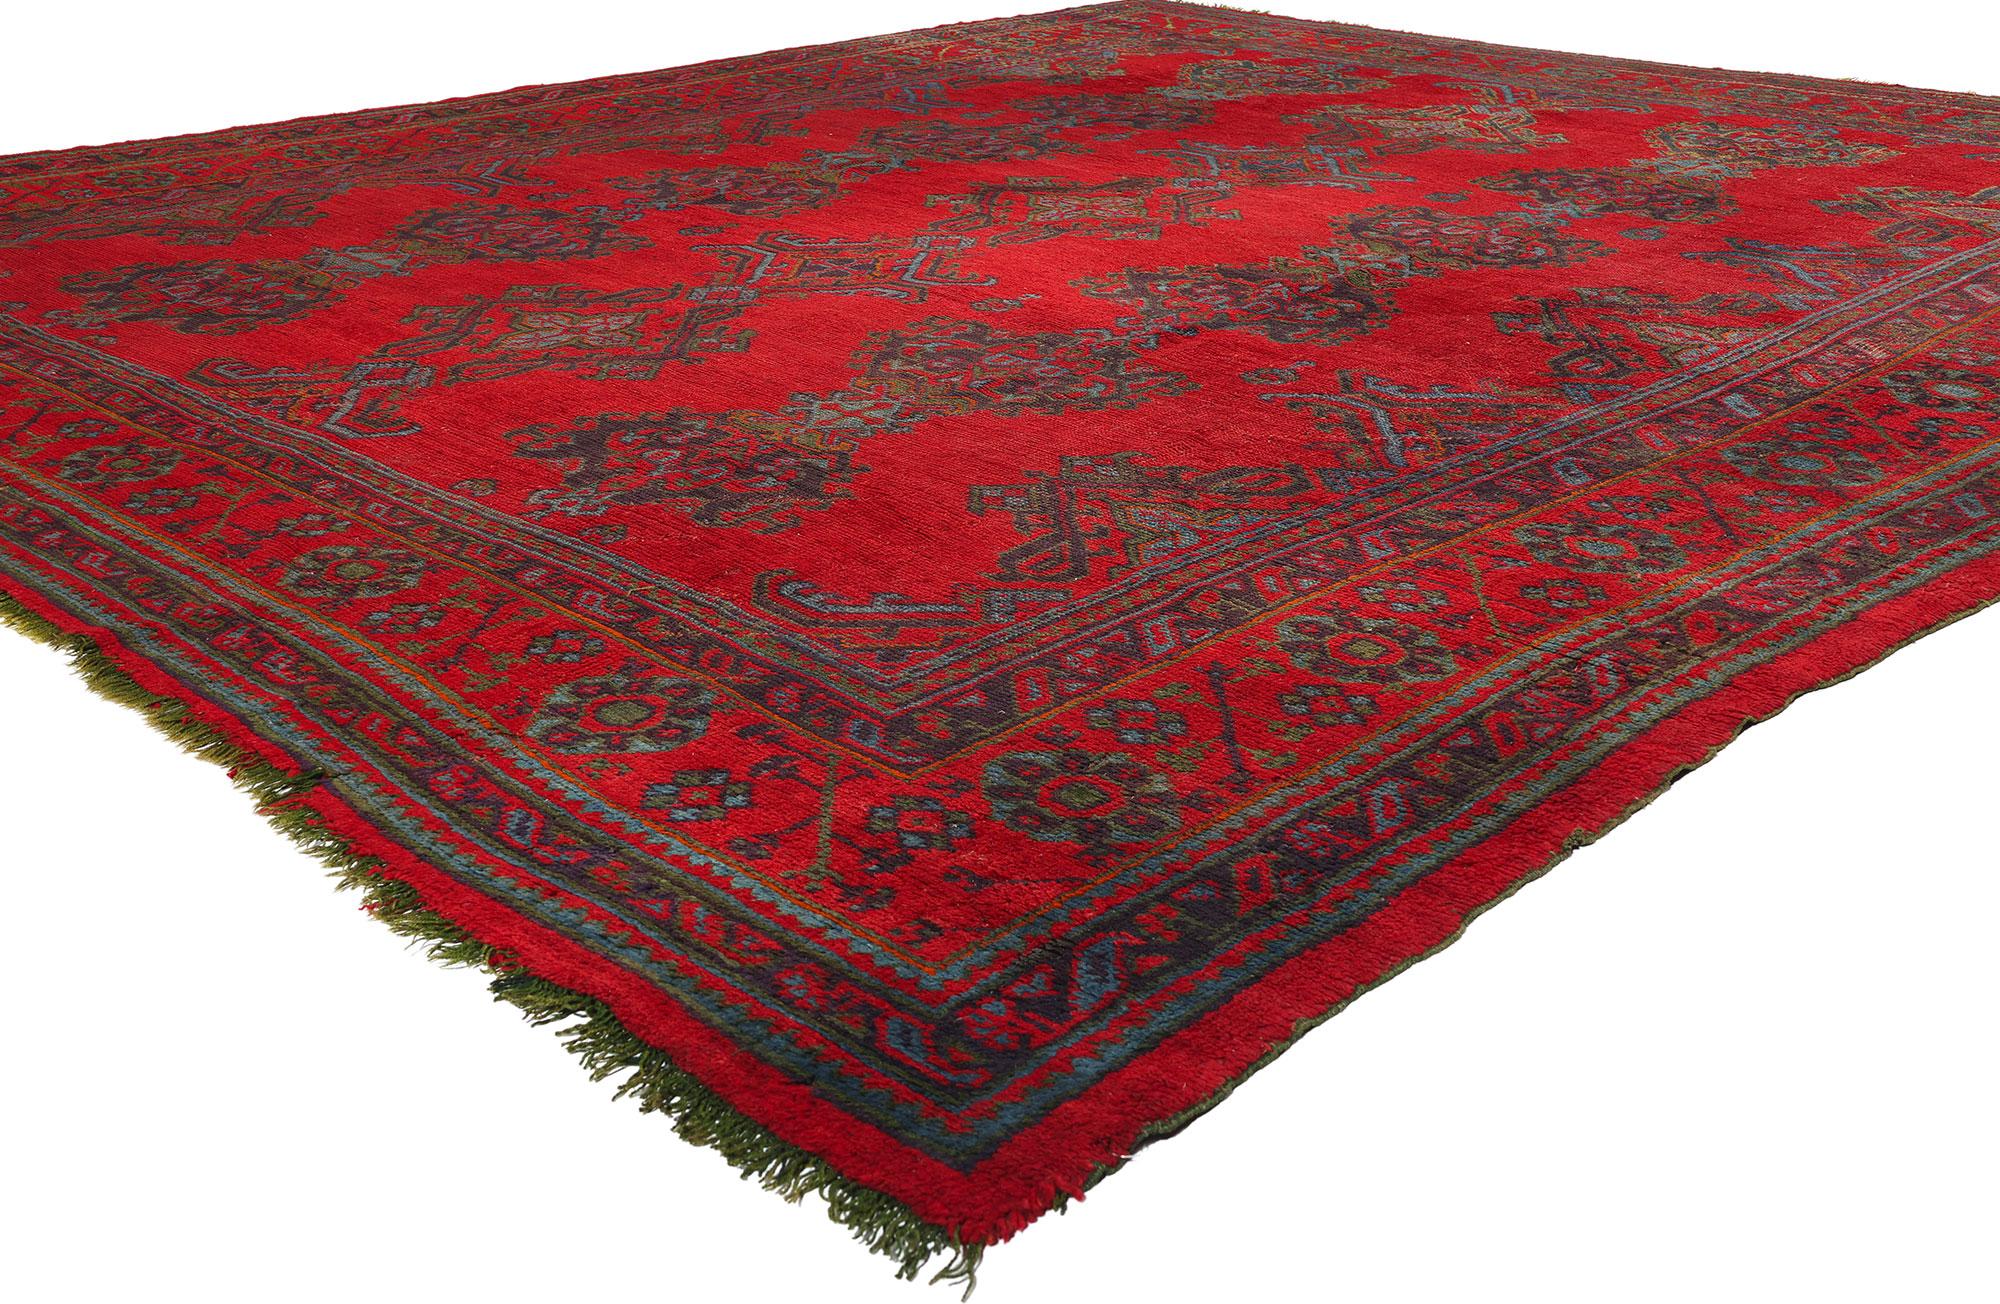 78743 Antique Red Turkish Oushak Rug, 11'08 x 13'06. Exhibiting a bold and expressive design rich in detail and texture, this antique red Oushak rug, hand-knotted from wool, mesmerizes with its woven splendor. The intricate allover pattern and